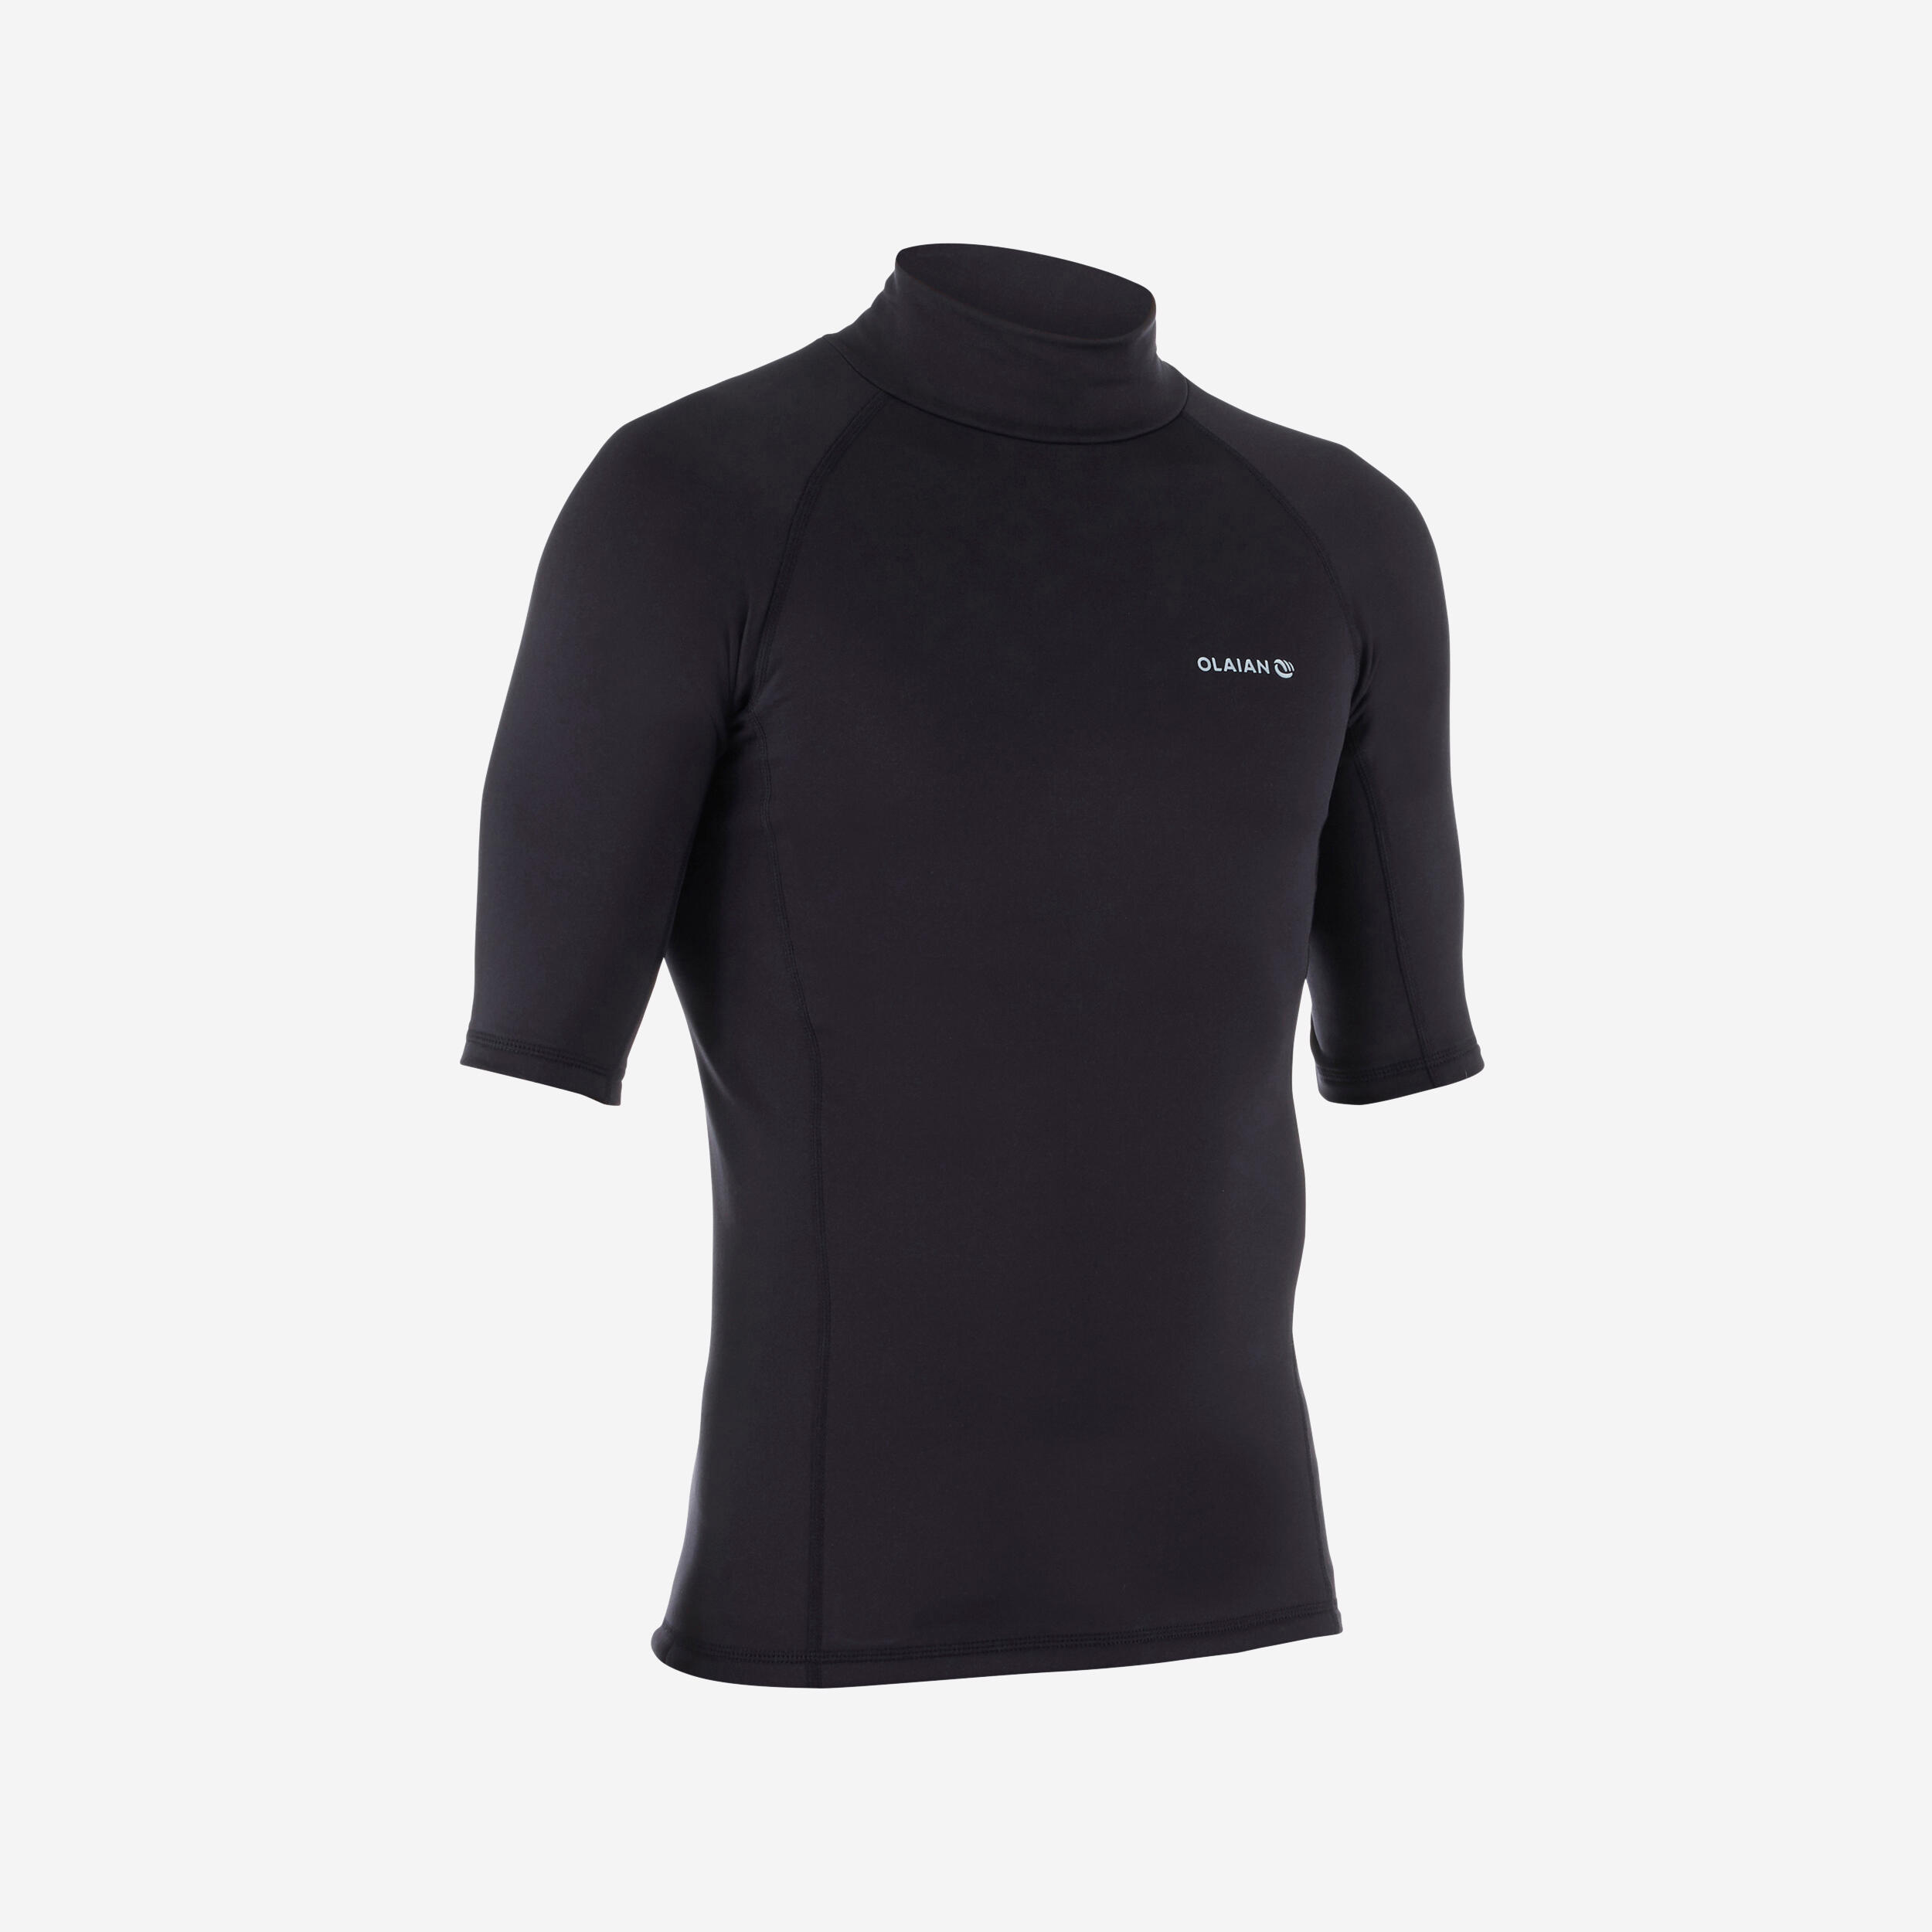 Tee shirt surf top thermique 900 